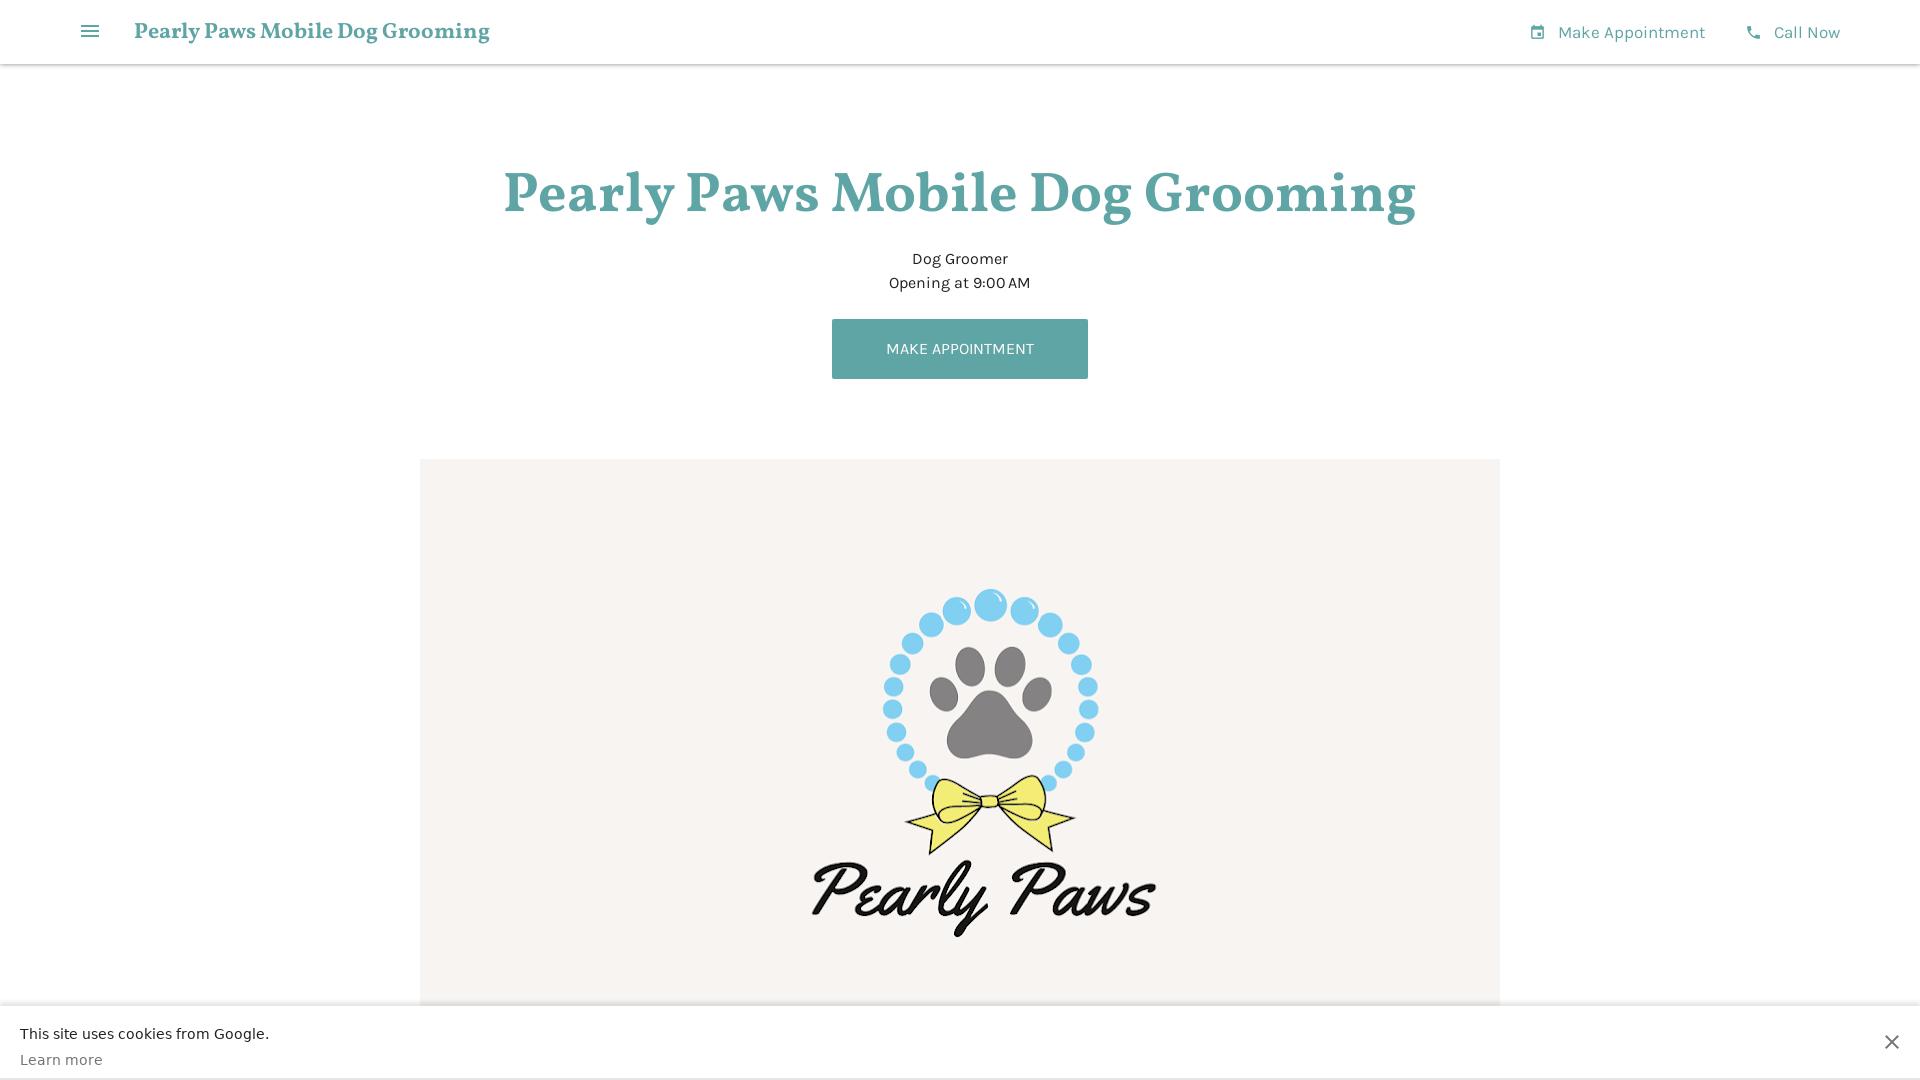 Pearly Paws Mobile Dog Grooming